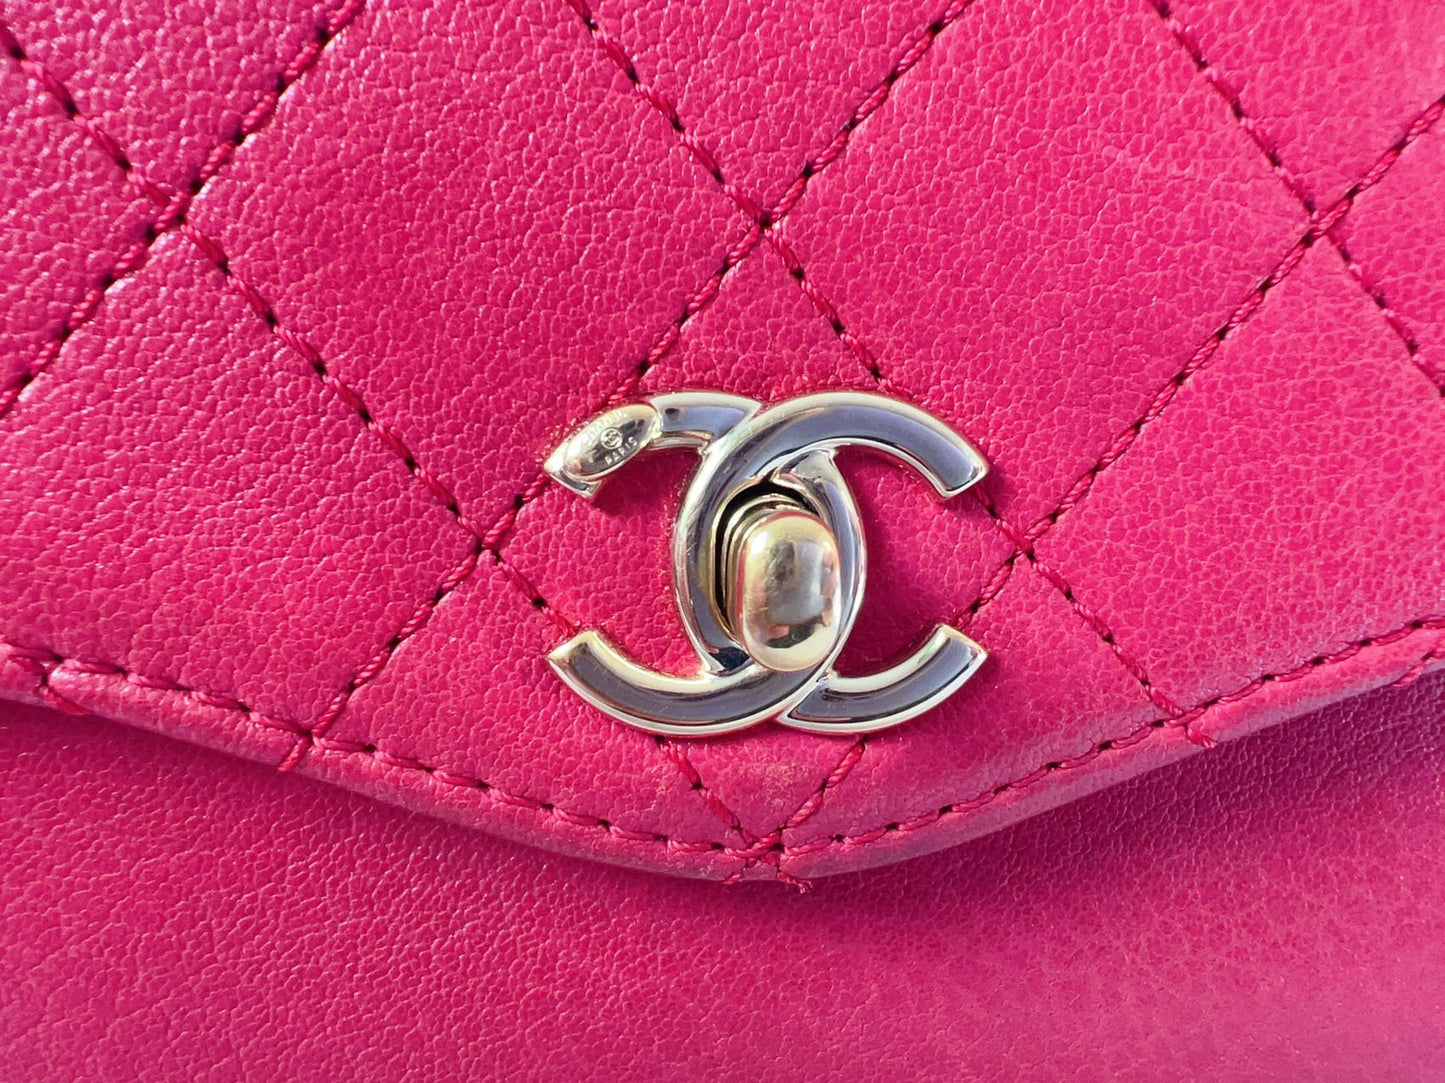 Chanel Coco Curve Envelope Flap Bag Quilted Goatskin Medium